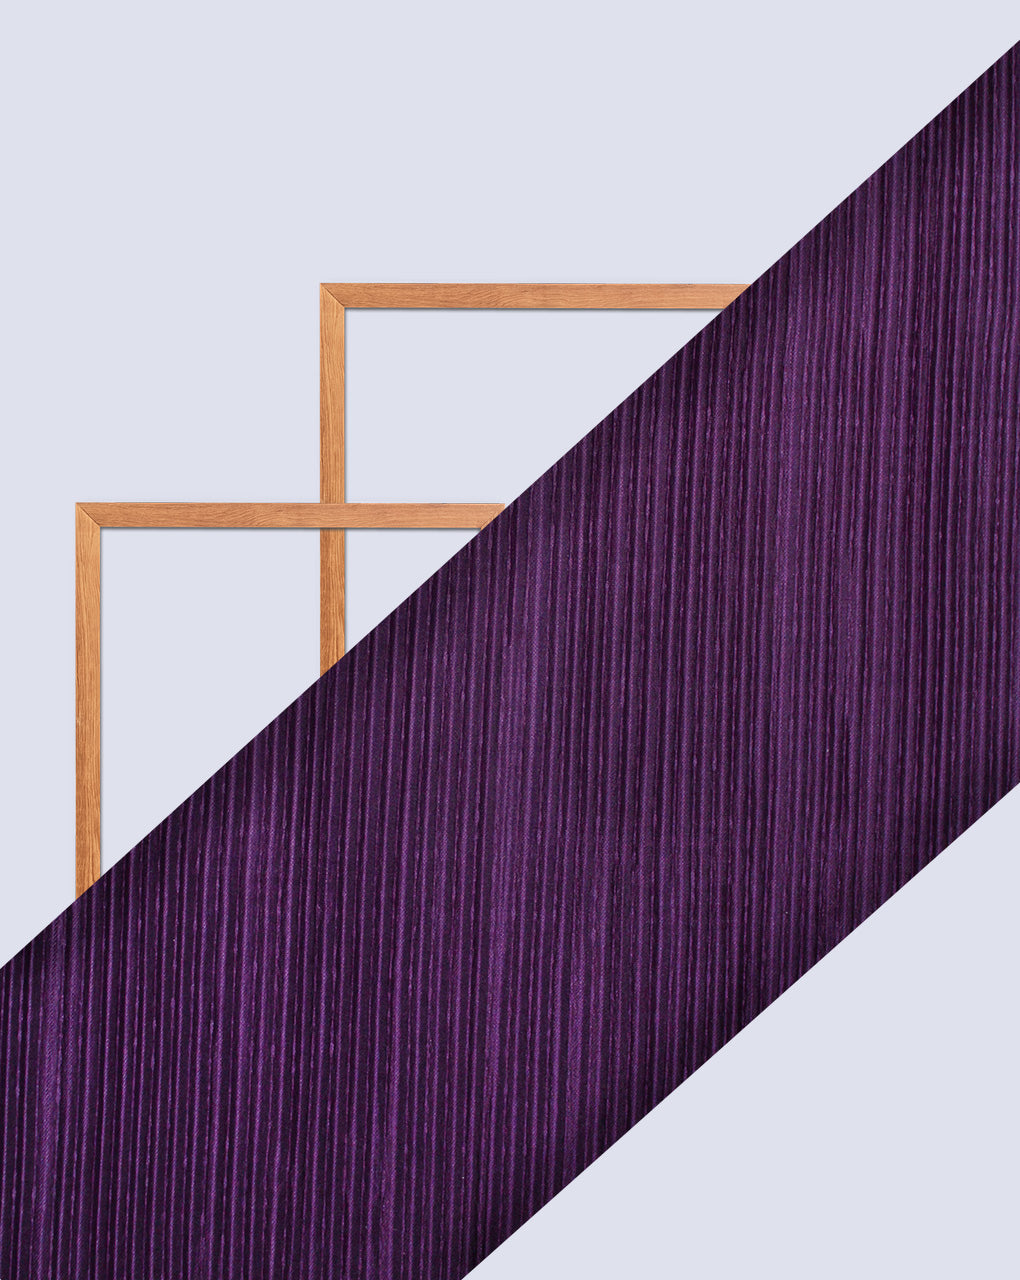 PURPLE POLYESTER PLEATED FABRIC